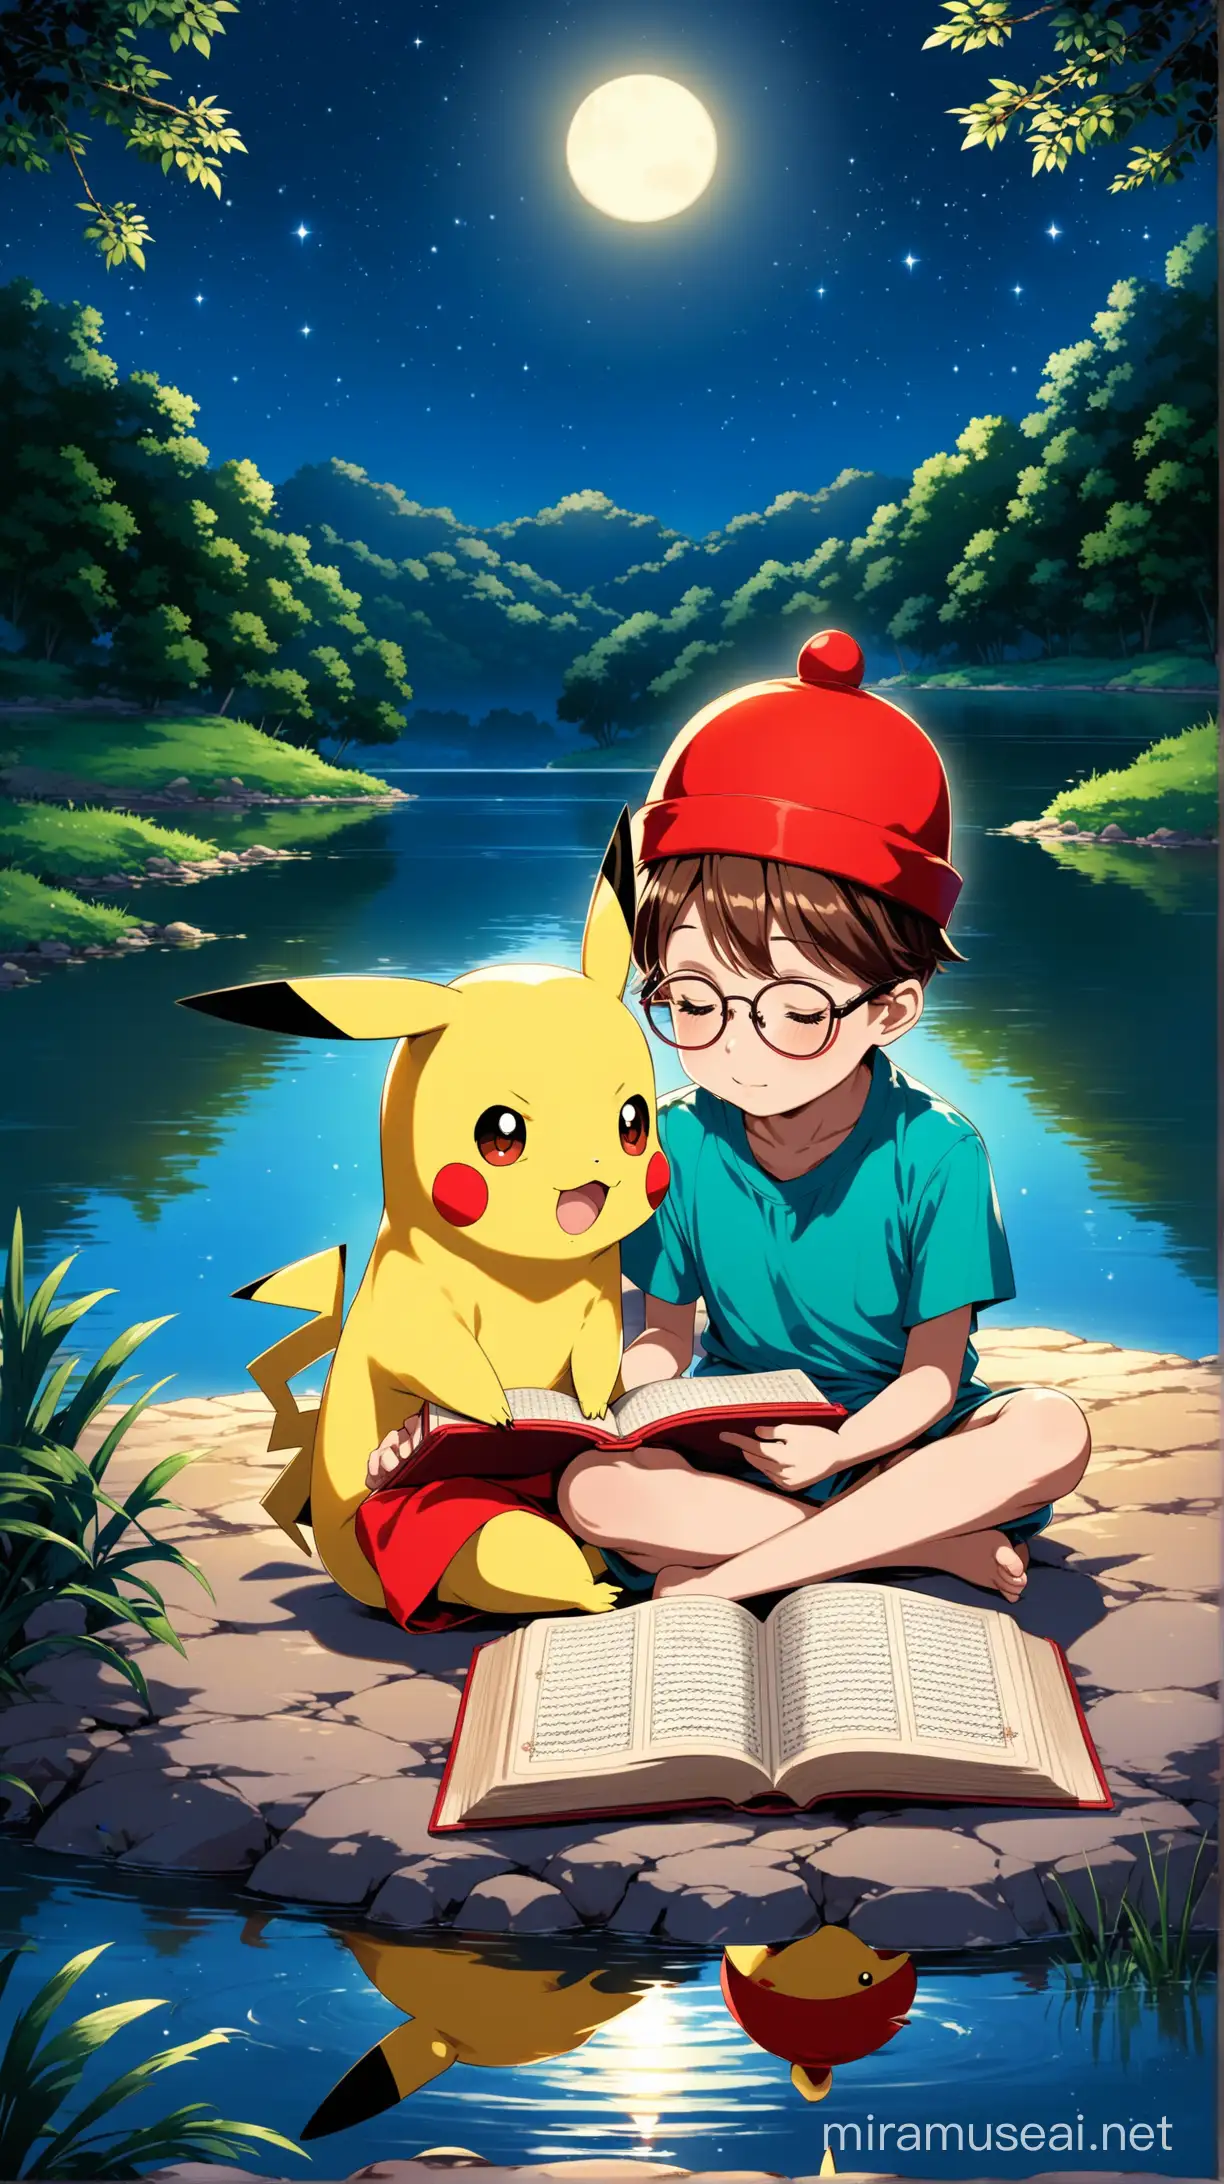 Pikachu is by a lake at night, there are two siblings, one is a girl whose head, neck and legs are covered so that her hair cannot be seen, this girl is a 14-year-old sister, and the other is a boy with a fez on his head and glasses. This child is 8 years old and these characters are reading the Quran together.